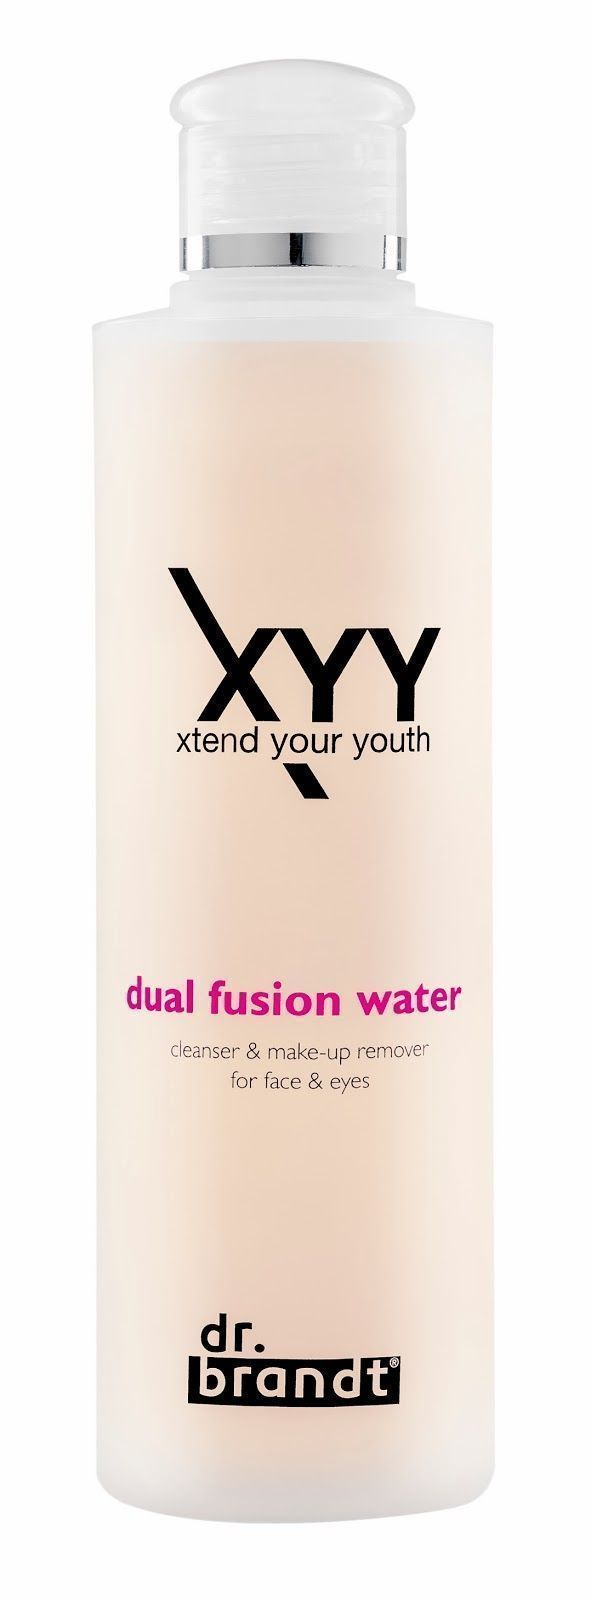 xtend your youth dual fusion water